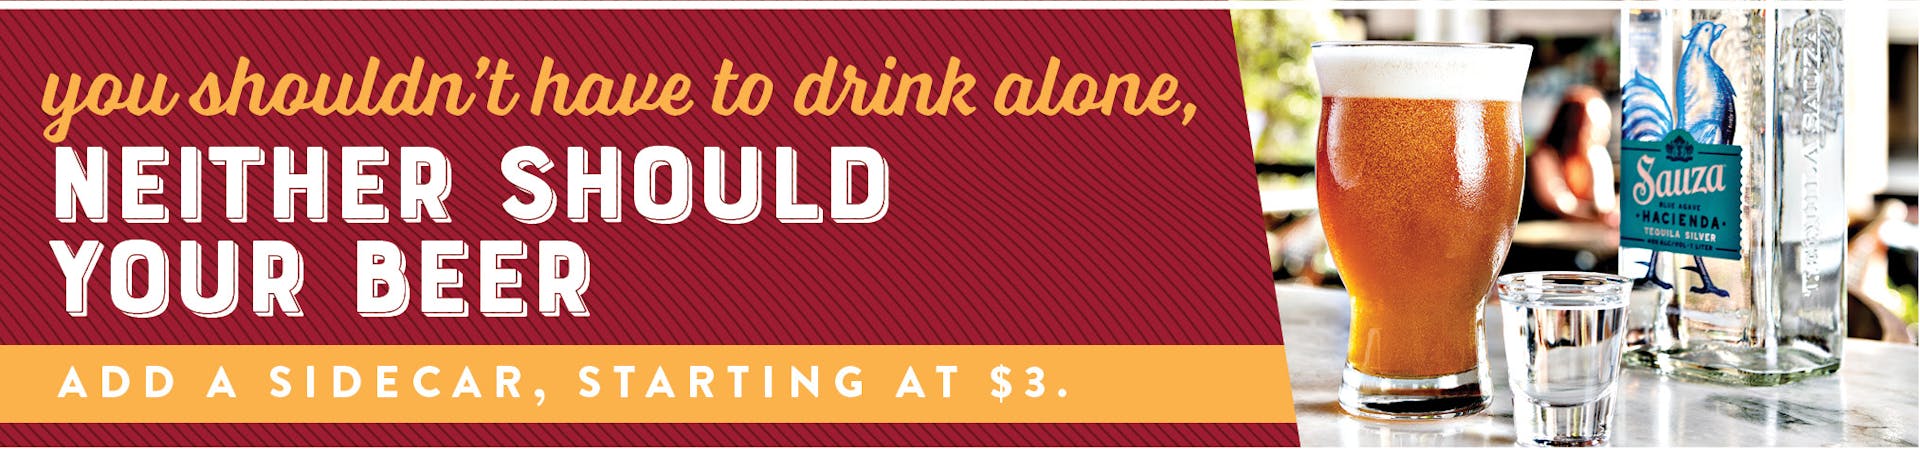 You shouldn't have to drink alone, neither should your beer. Add a sidecar, starting at $3.